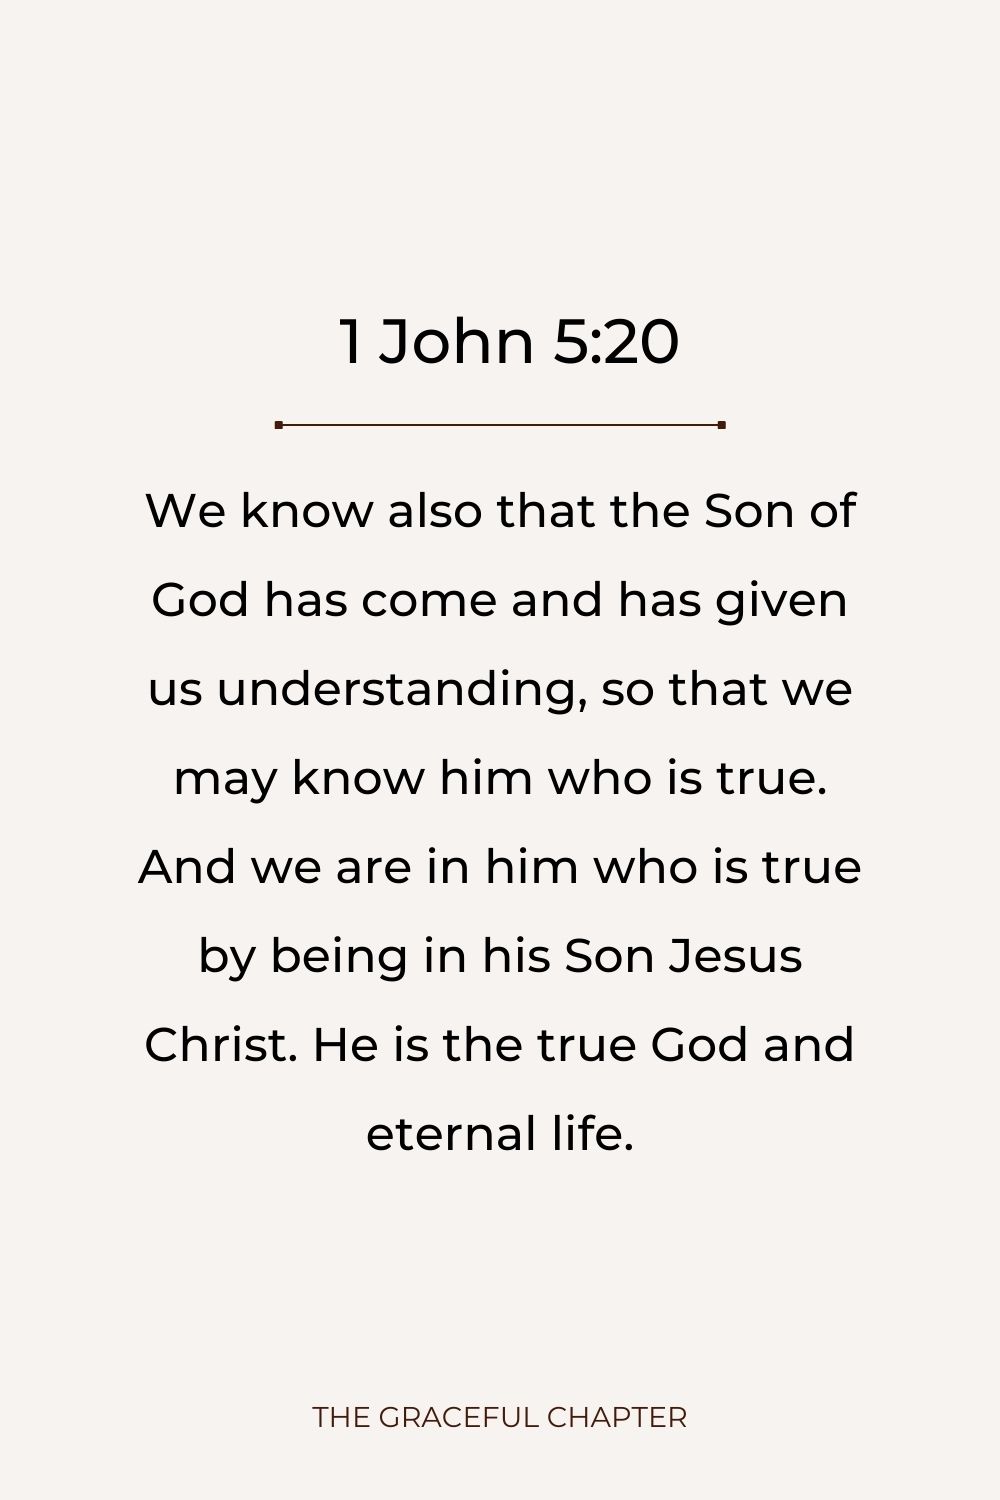 We know also that the Son of God has come and has given us understanding, so that we may know him who is true. And we are in him who is true by being in his Son Jesus Christ. He is the true God and eternal life. 1 John 5:20